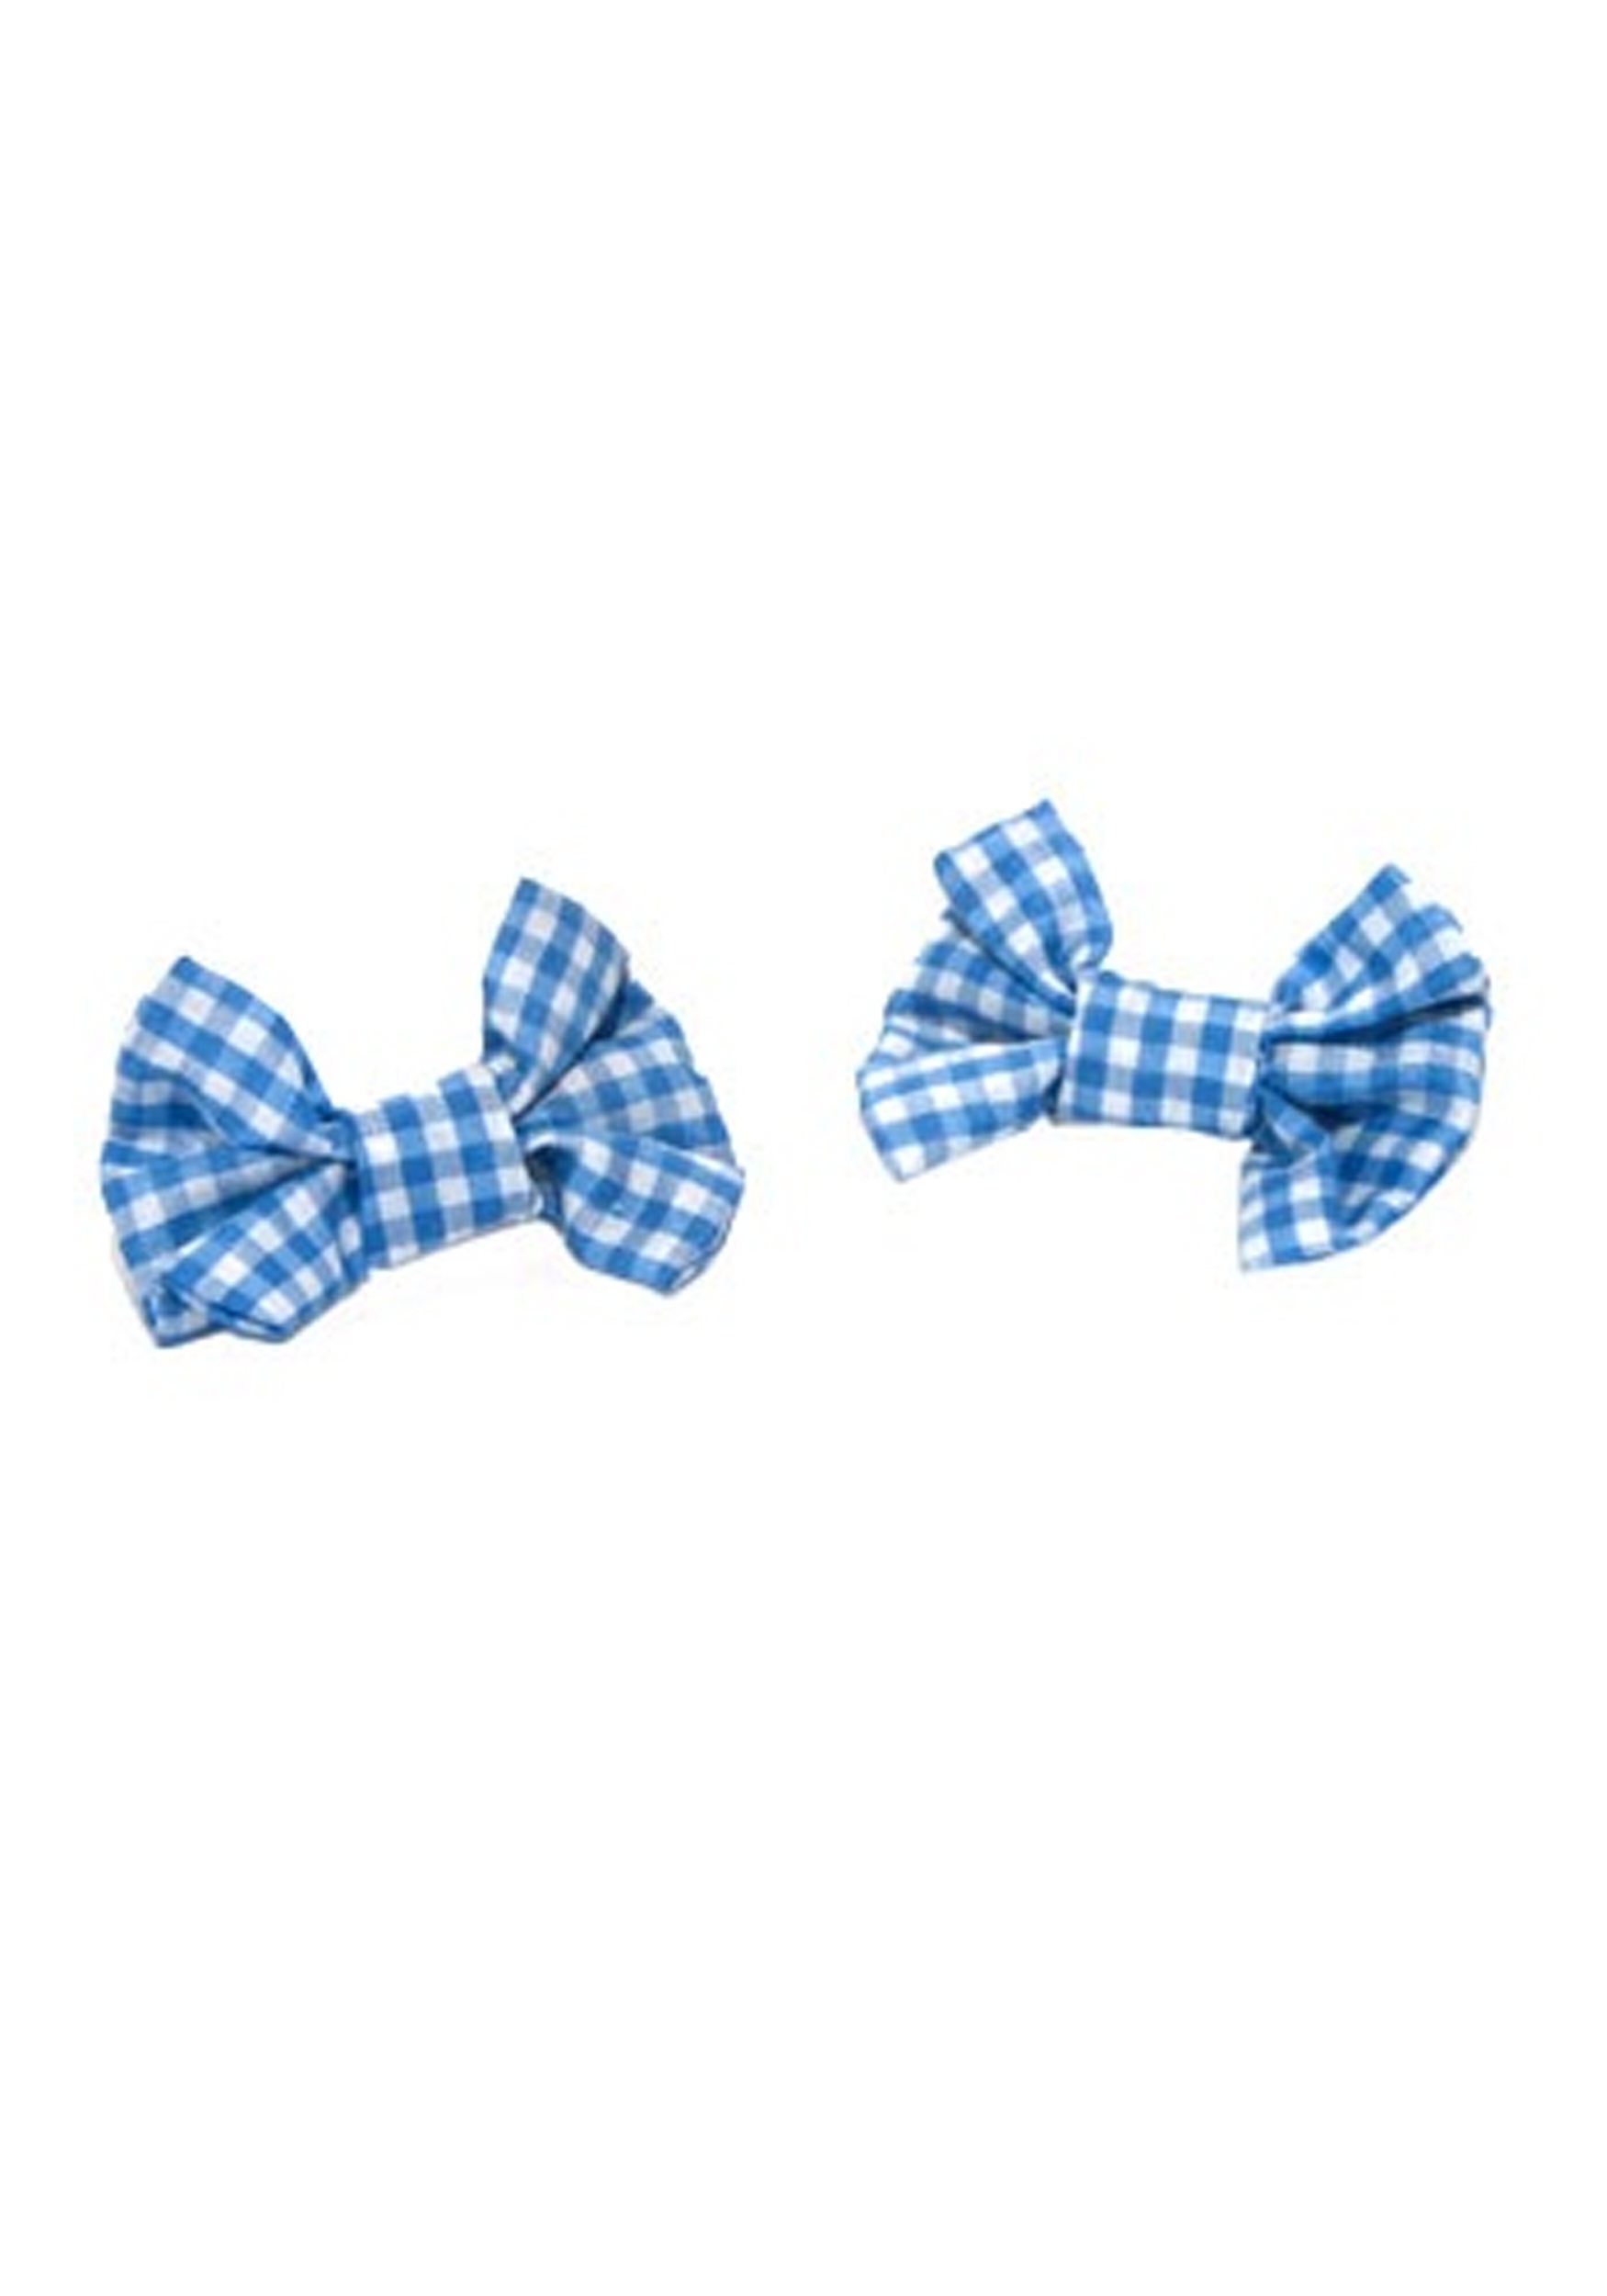 Lot 2 Blue White Gingham Dainty Pigtail Hair Bow Dorothy Wizard of Oz Halloween 